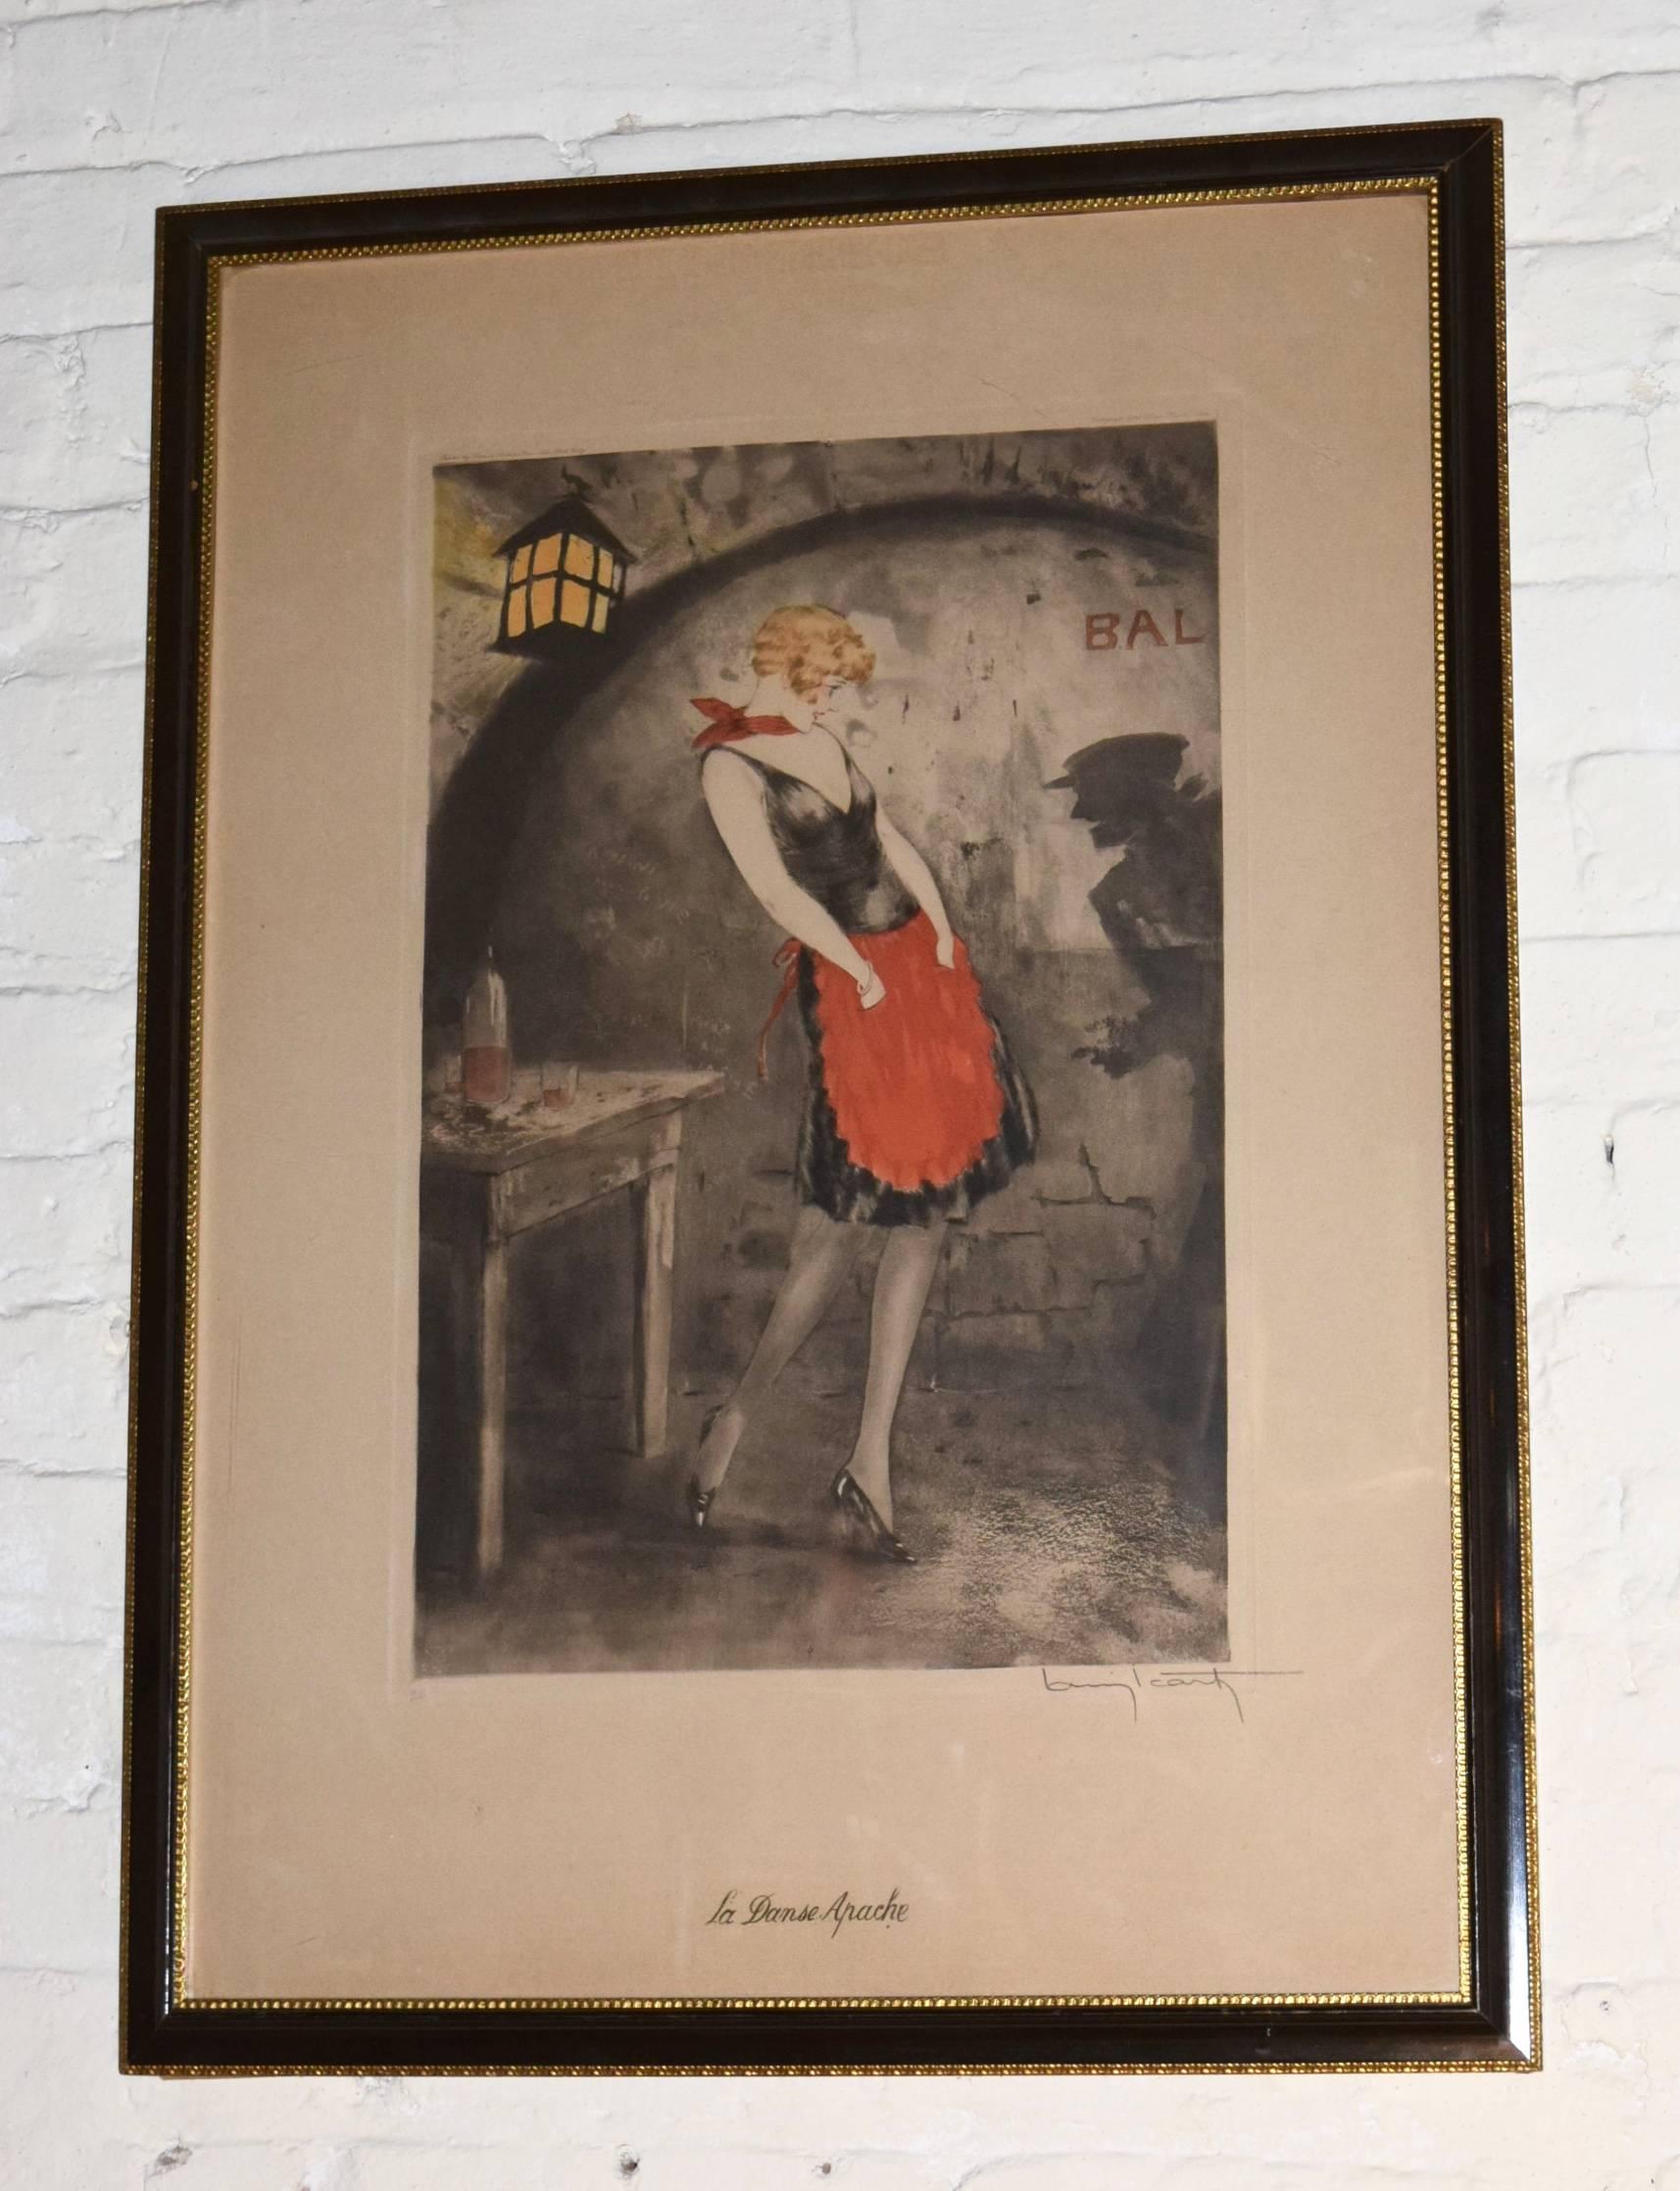 Etching on paper mounted on paperboard titled "La Danse Apache" original design and copyright of Louis Icart 1929 in excellent condition. The artwork is hand signed by the artist, signed by the editor and the artist's copyright, numbered